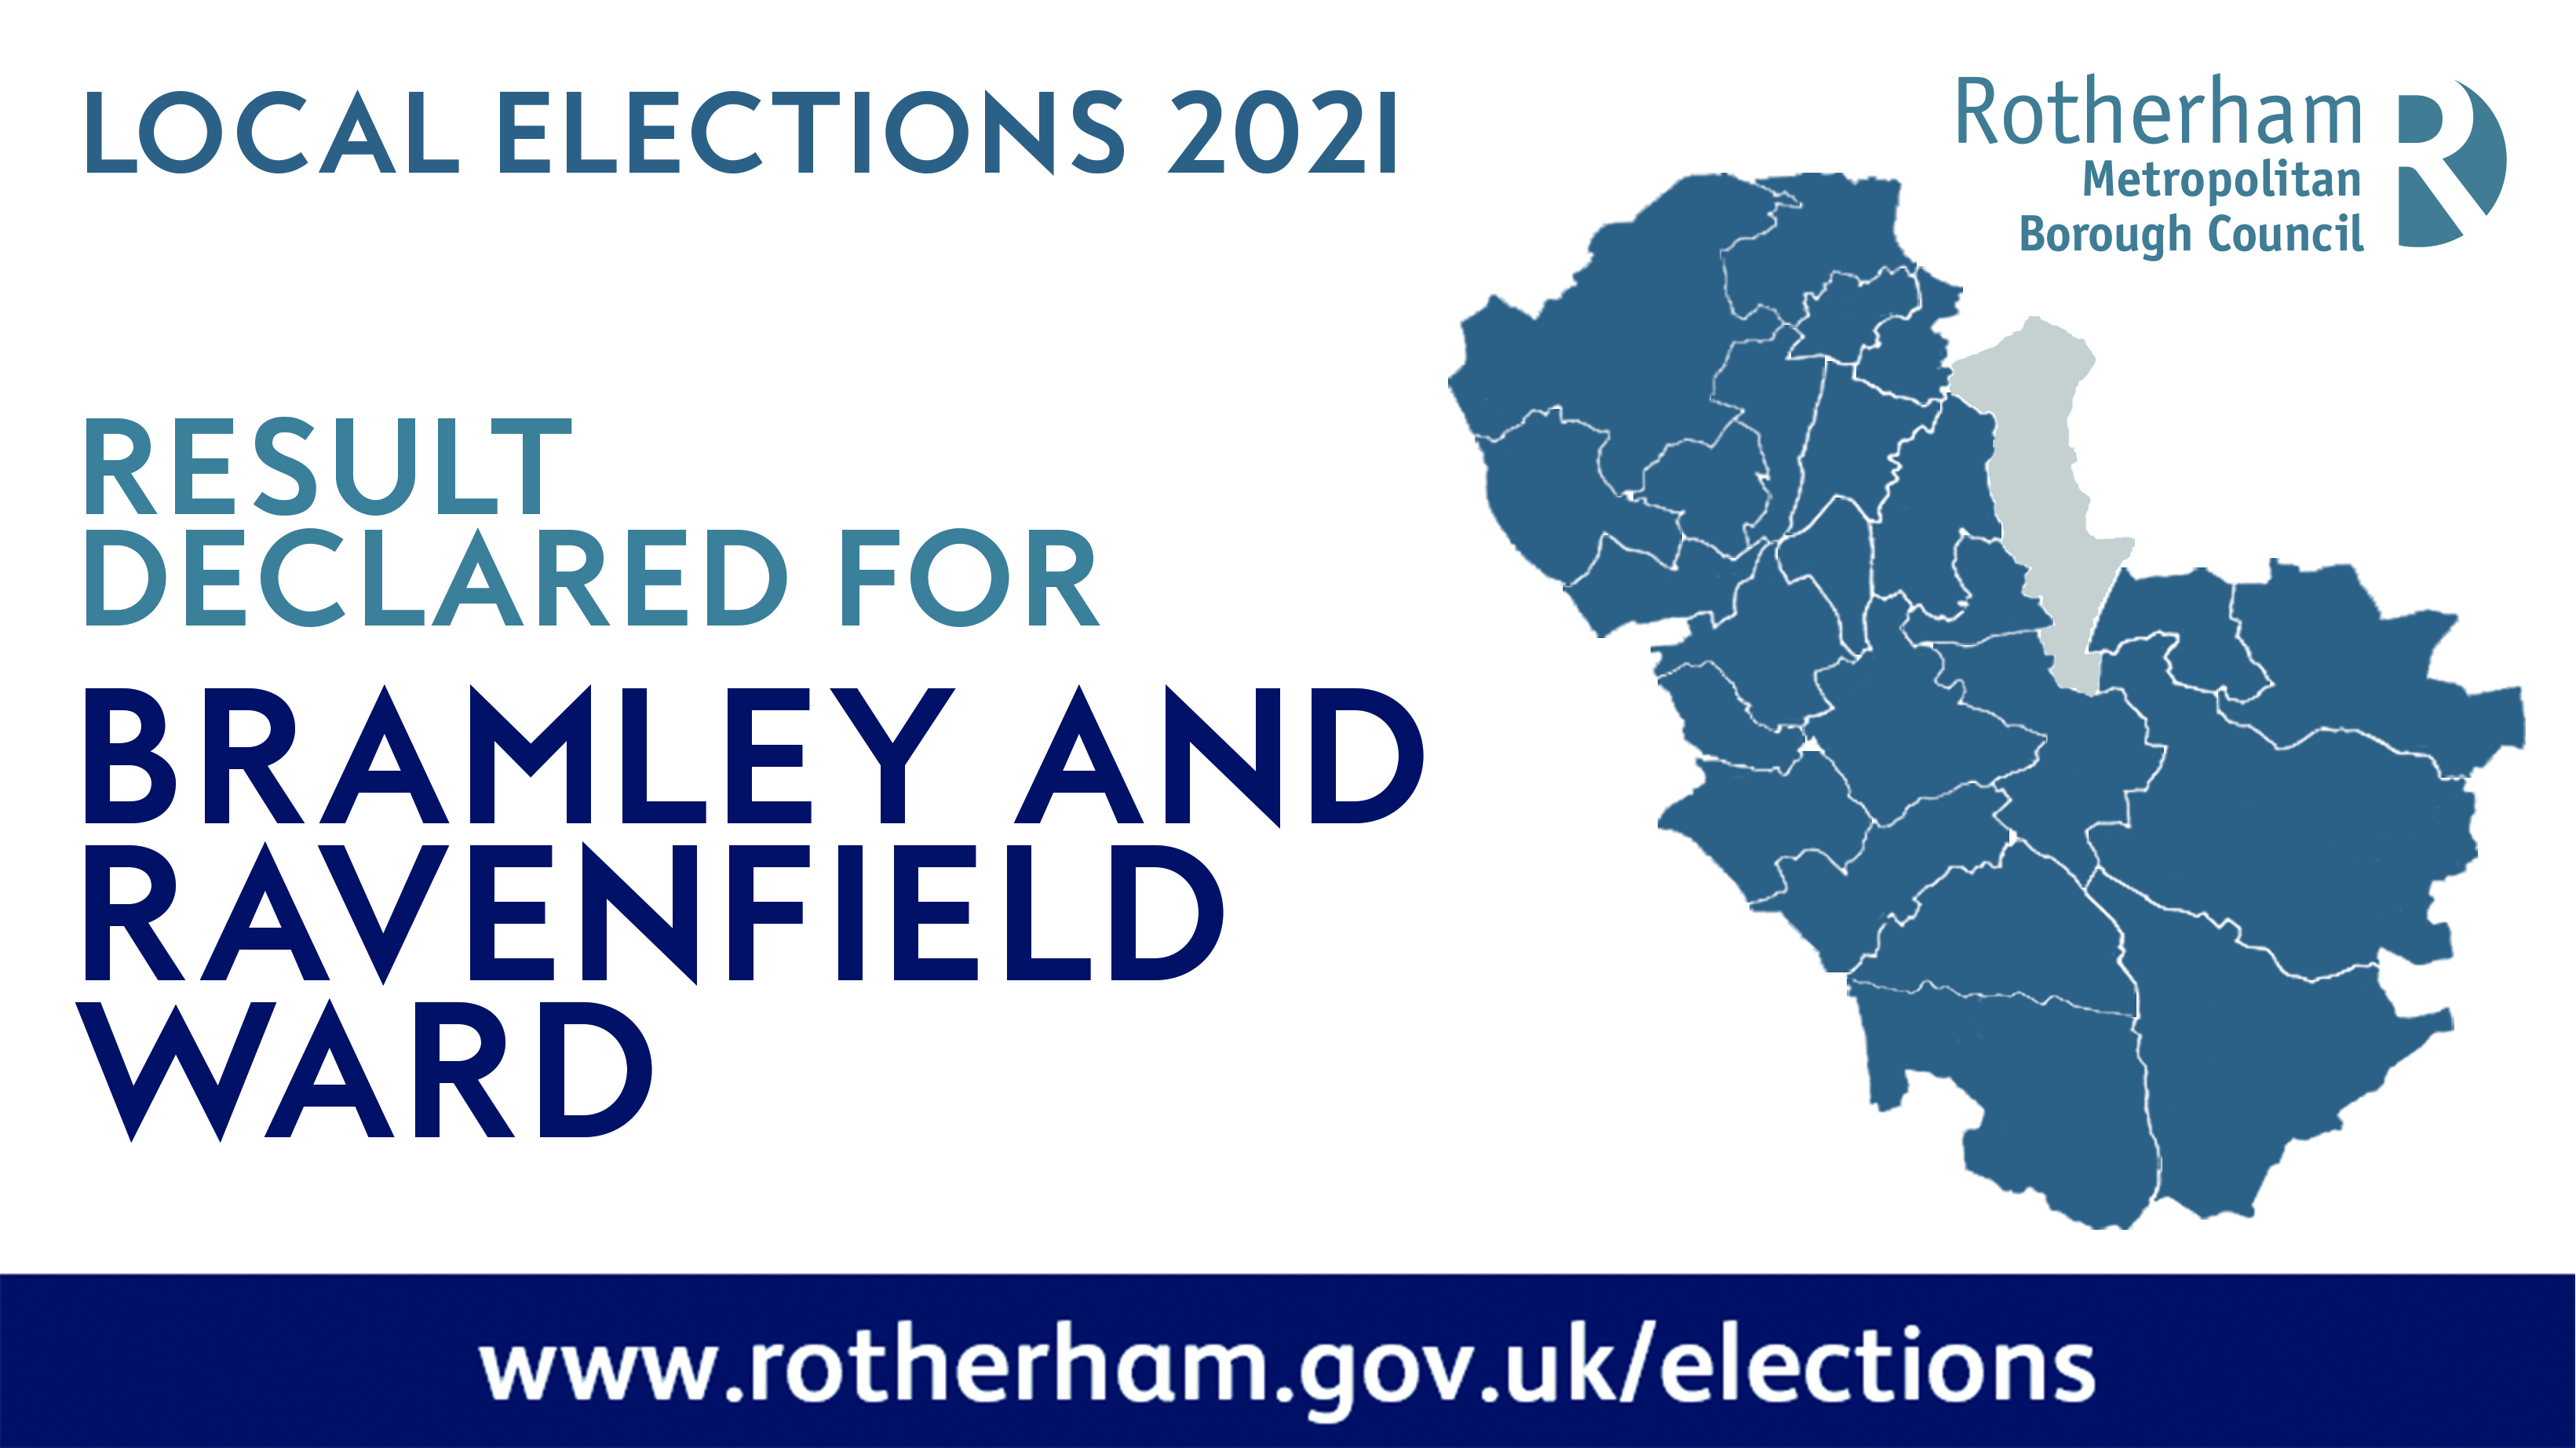 Bramley and Ravenfield ward result declared